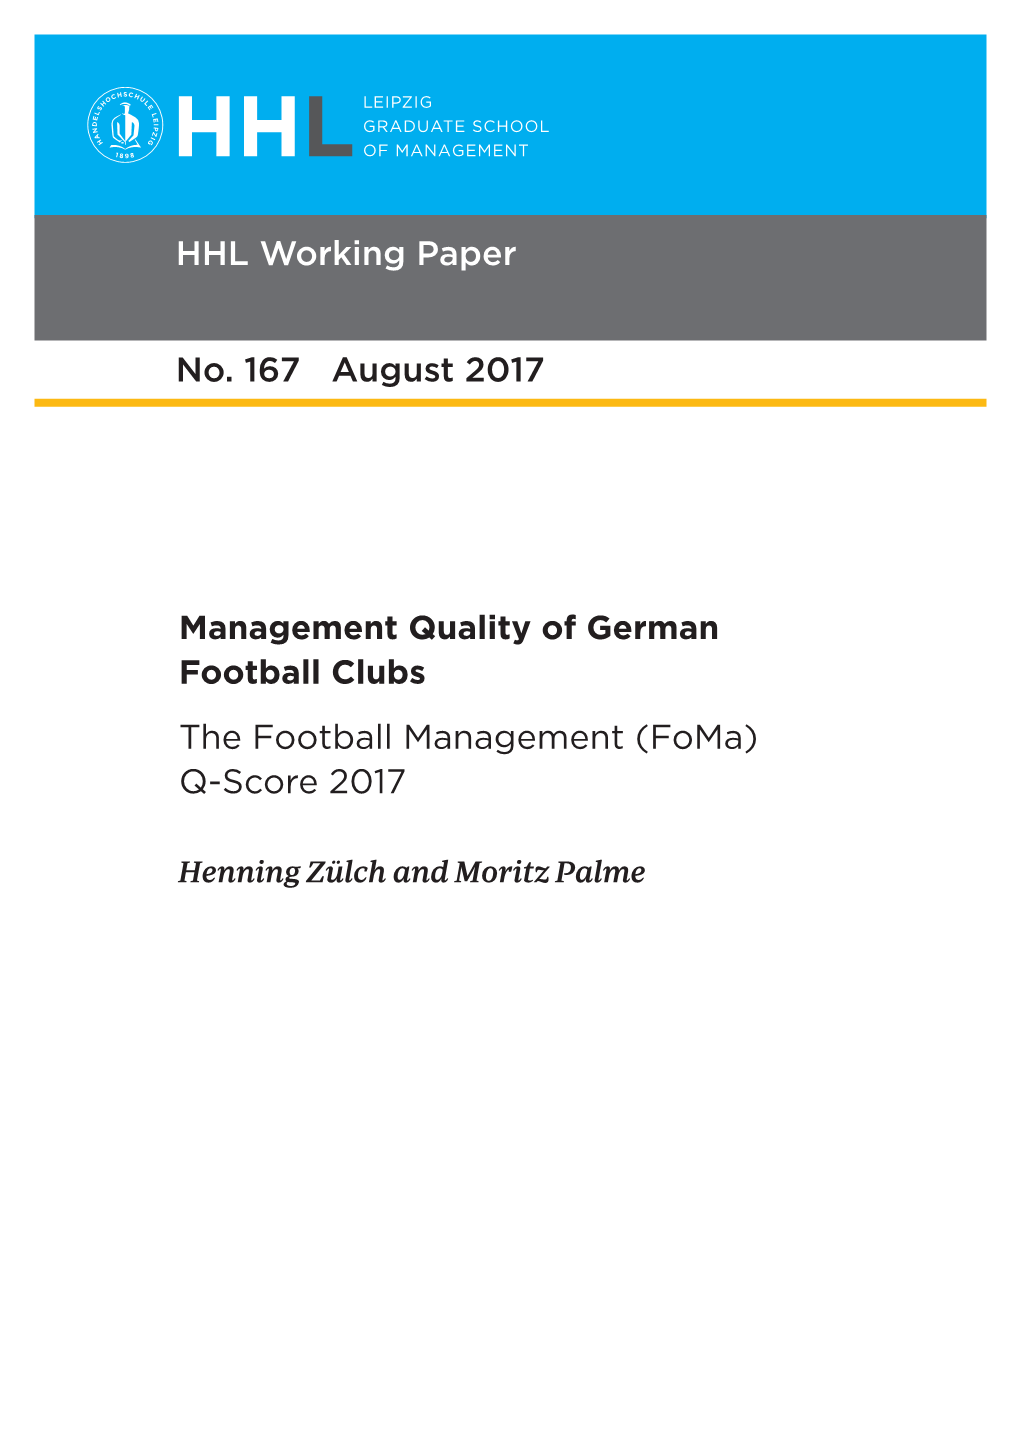 No. 167 August 2017 HHL Working Paper the Football Management (Foma) Q-Score 2017